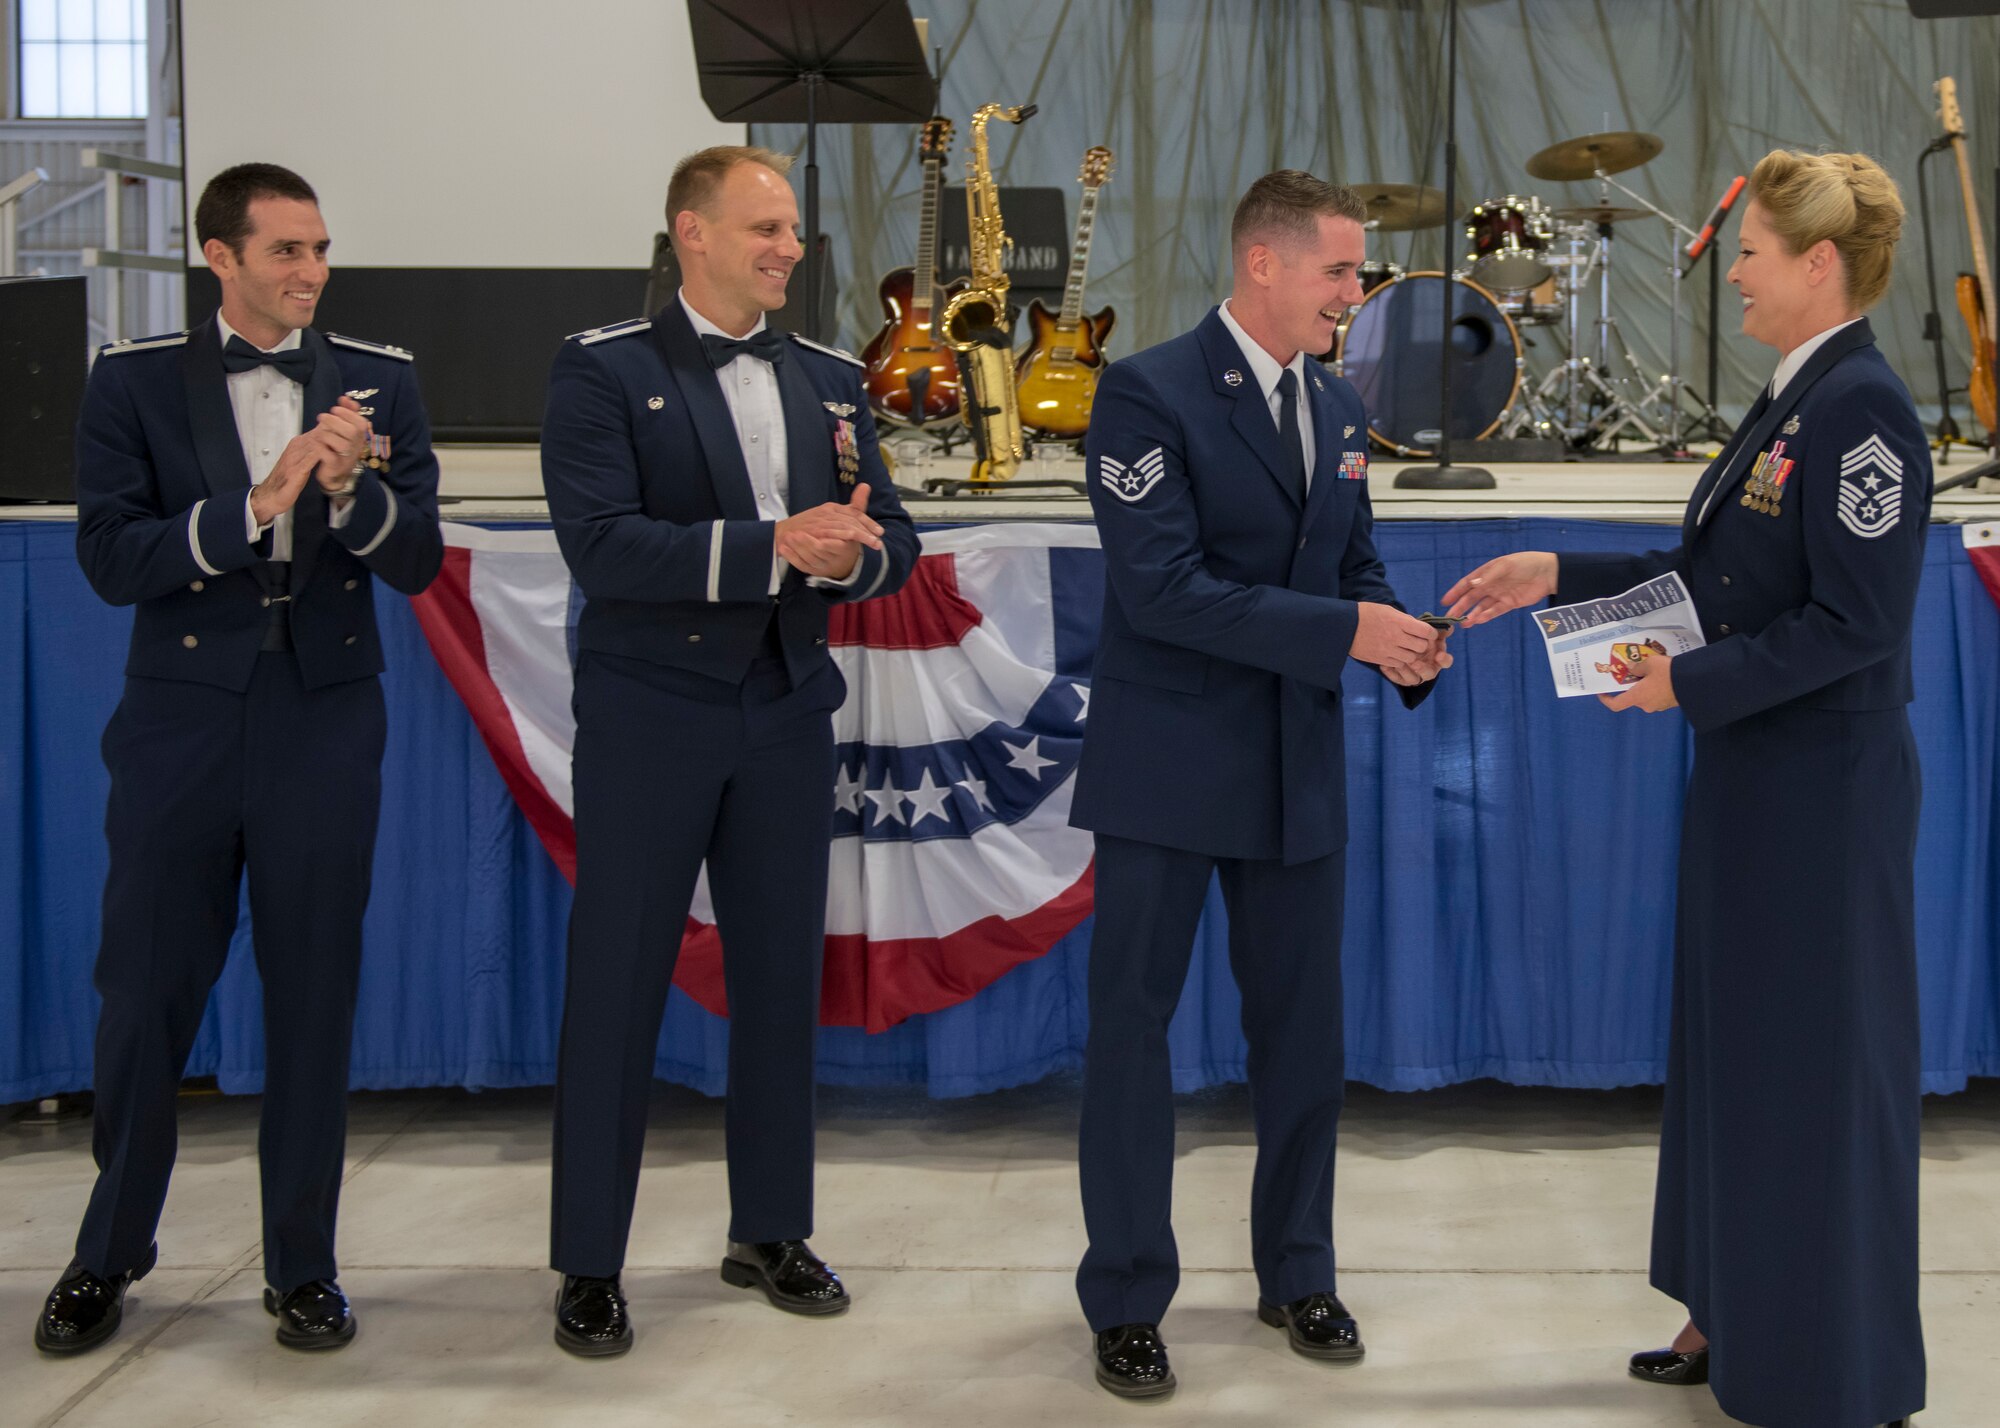 Chief Master Sgt. Sarah Esparza, 49th Wing command chief, congratulates newly promoted Tech. Sgt. Kyle Saxon, 54th Operations Support Squadron operations flight chief, on his promotion at the Air Force Ball, Sept. 14, 2019, on Holloman Air Force Base, N.M. This Saxon promoted from staff sergeant to technical sergeant through the Stripes for Exceptional Performers program. (U.S. Air Force photo by Airman 1st Class Kindra Stewart)